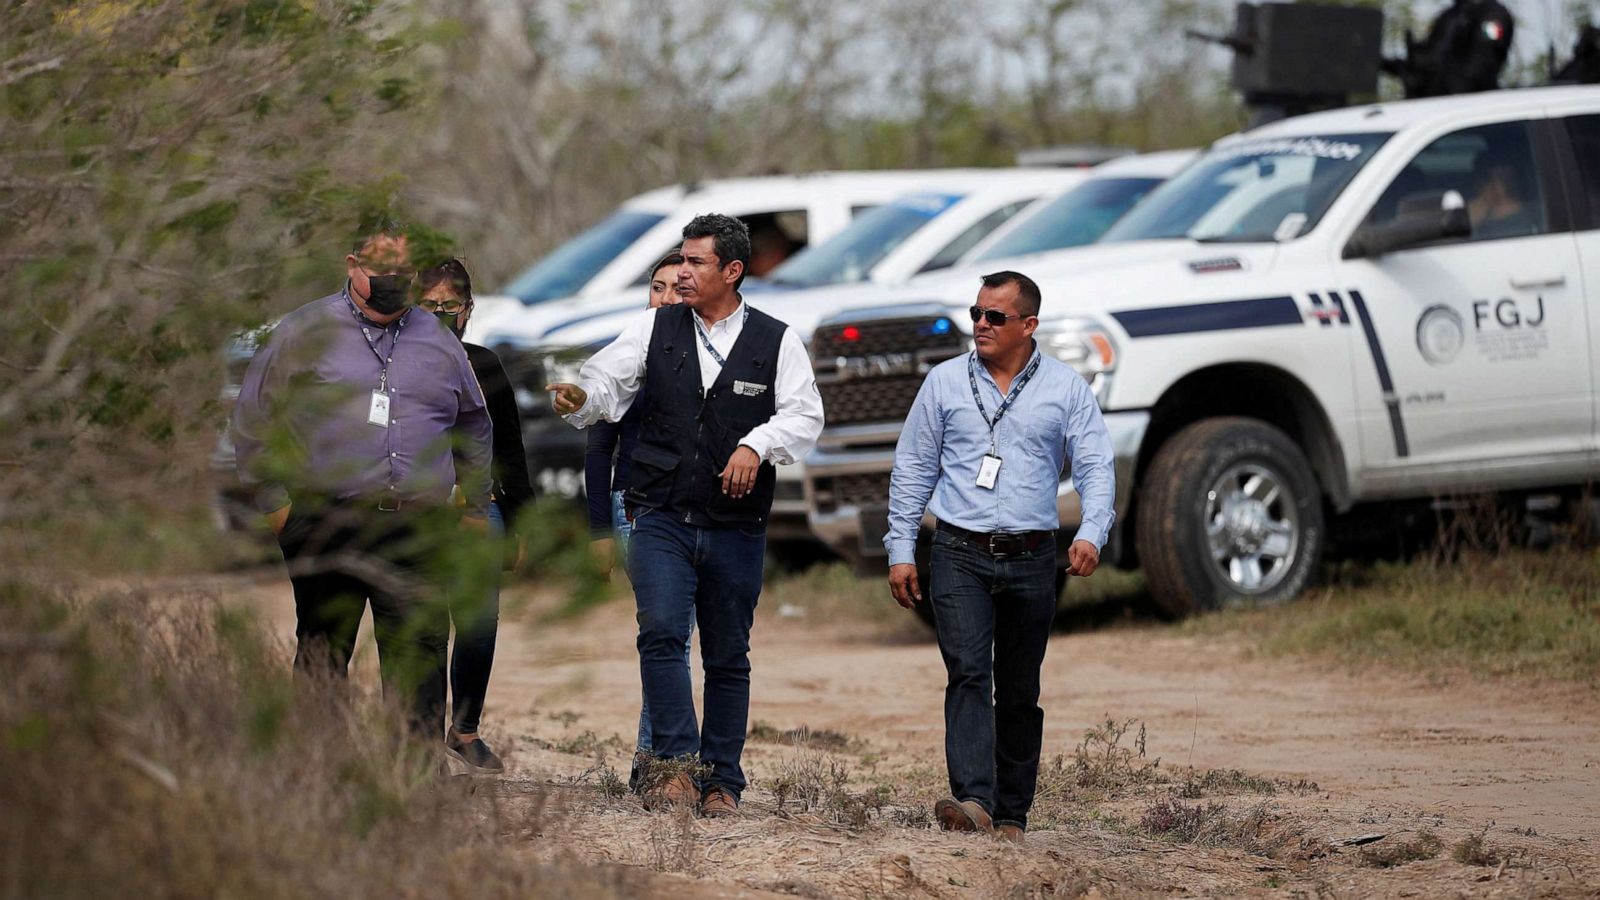 Everything we know about the kidnapping of 4 Americans in Mexico